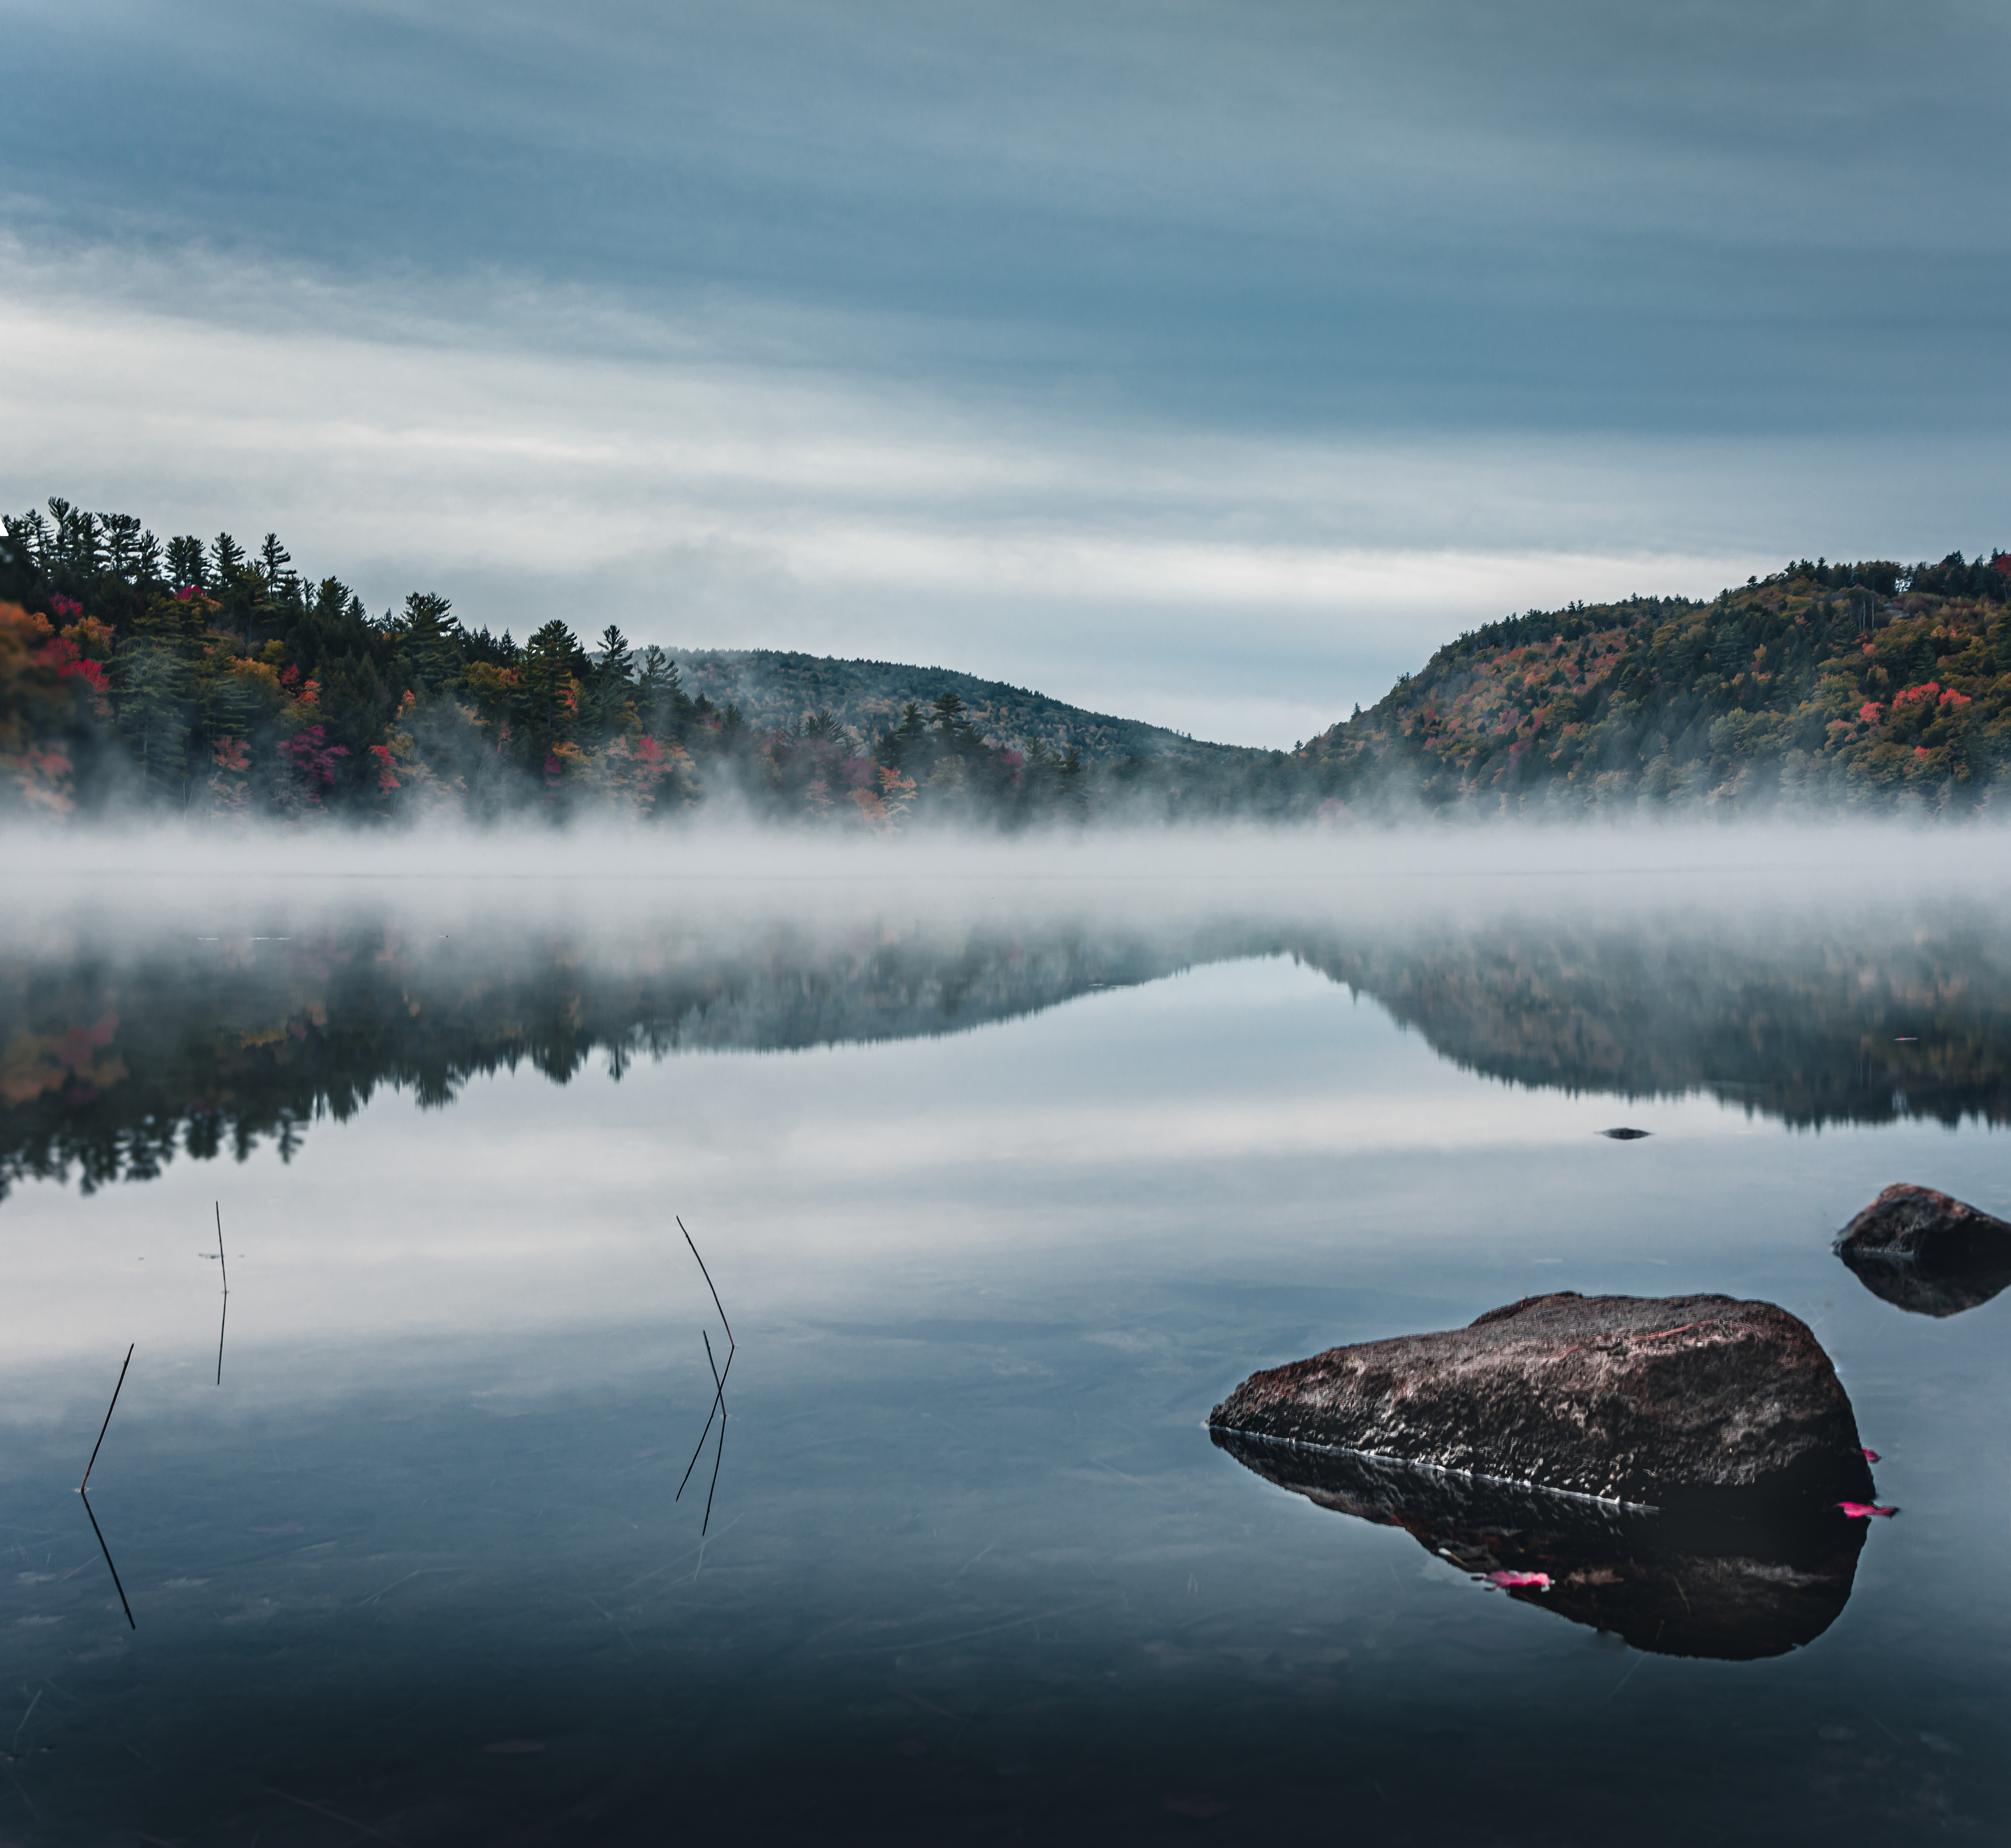 Mist on the water in Maine